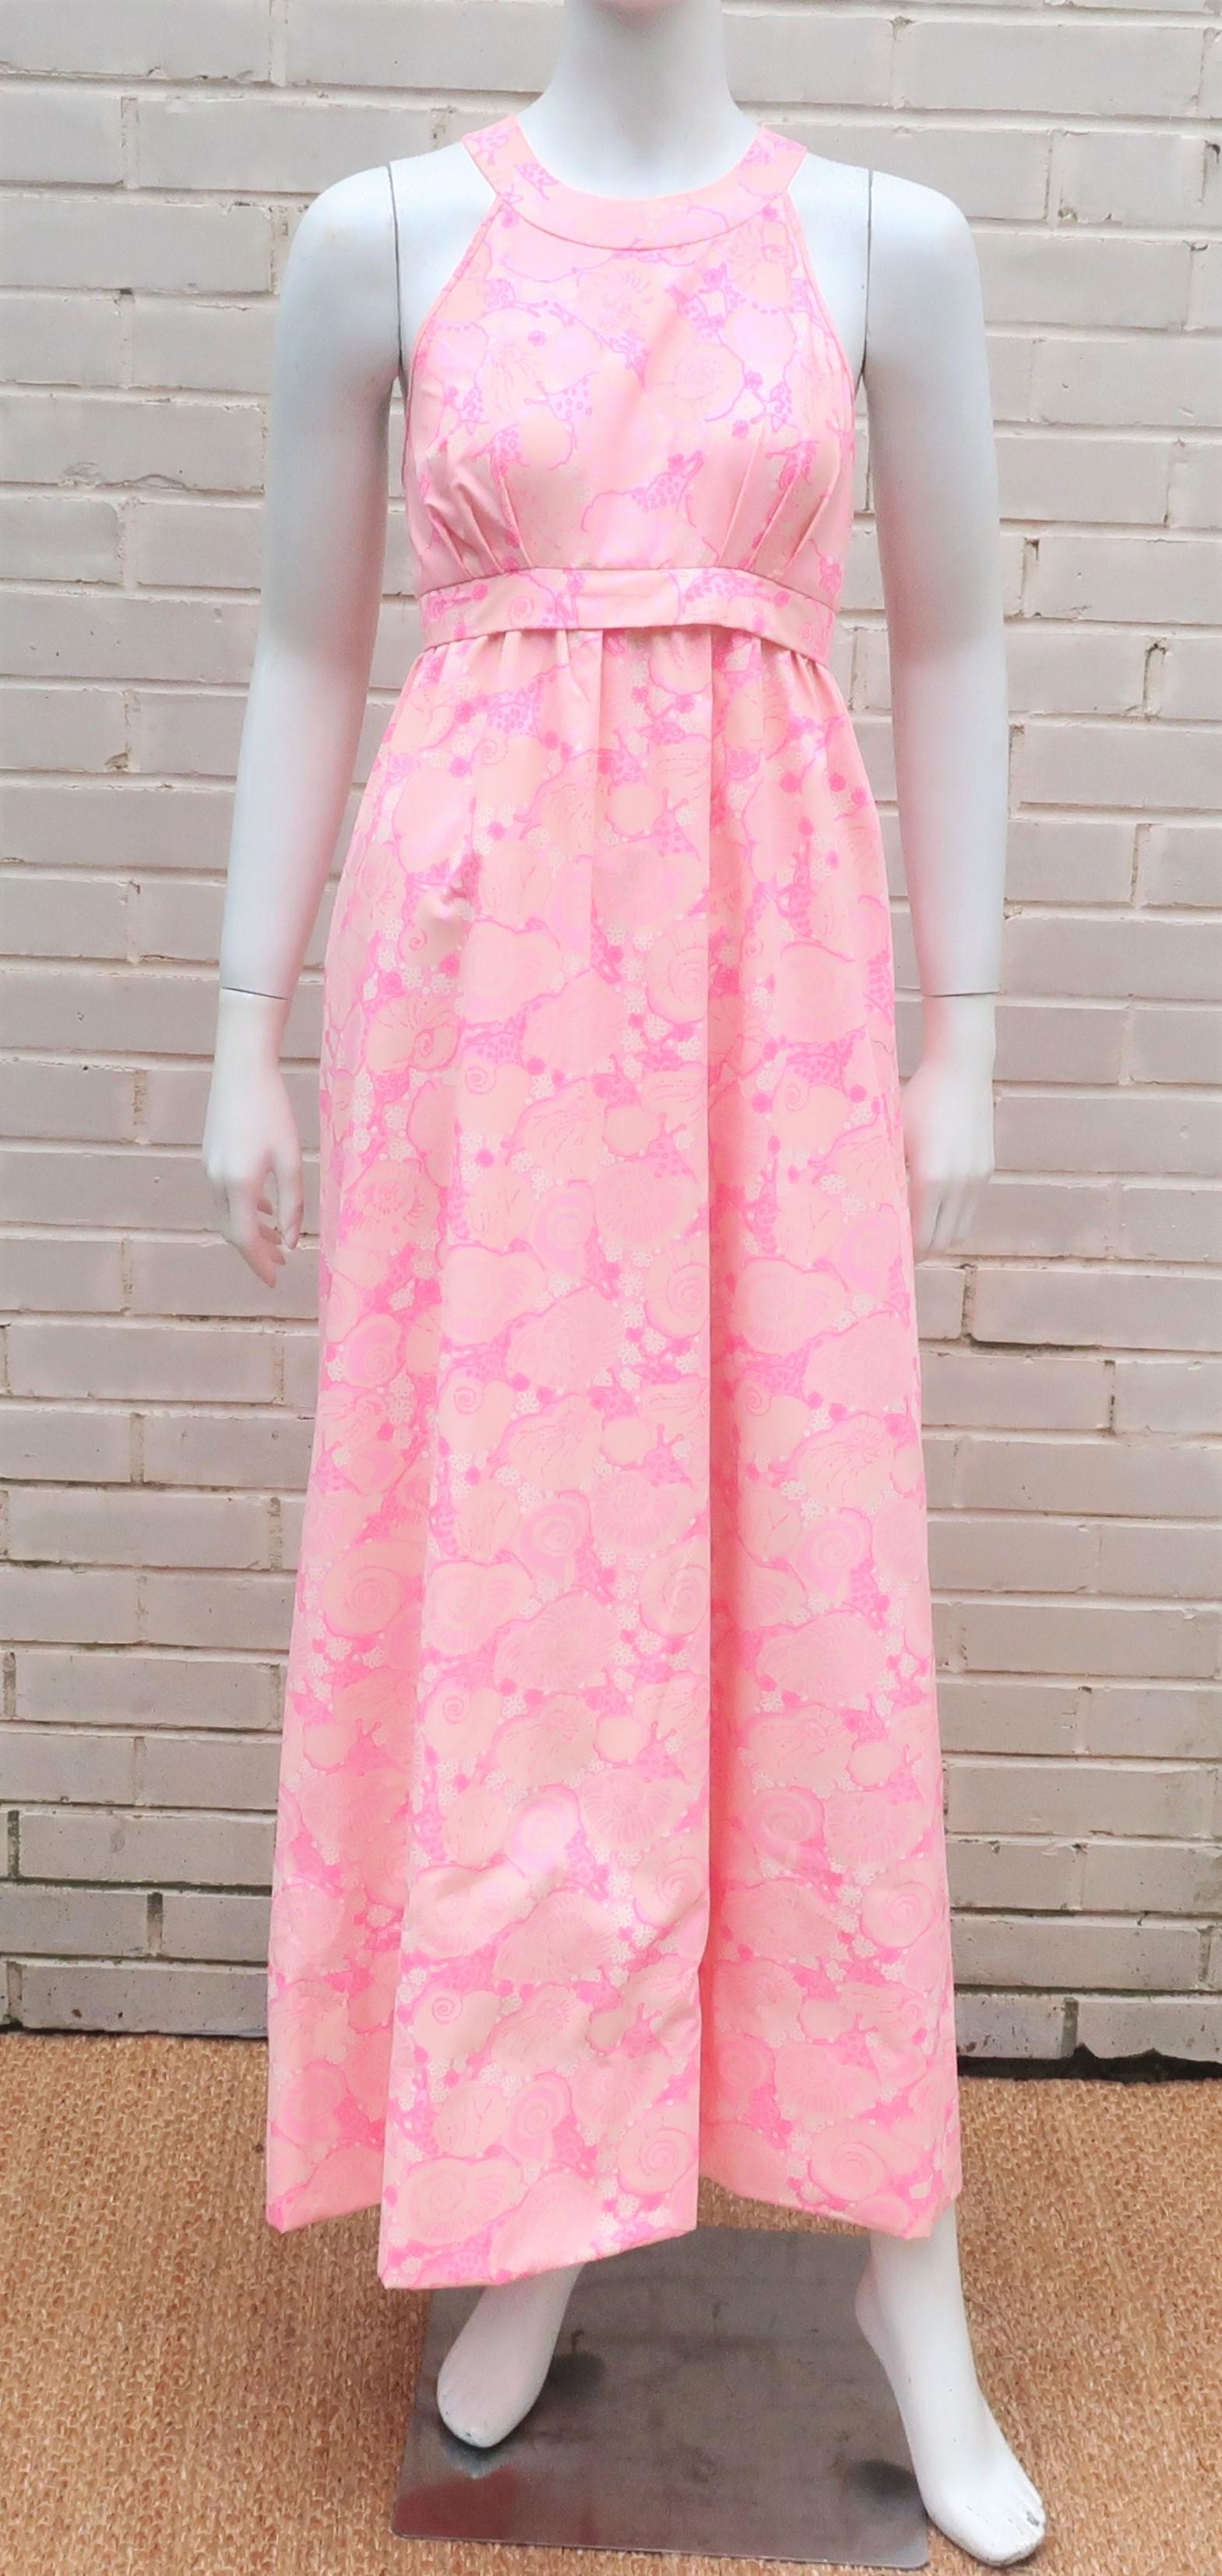 Pretty in pink!  1960's Lilly Pulitzer pink halter dress in a cotton blended fabric with a snail print.  The dress zips and hooks at the back with crisscrossed buttoned straps that offer three adjustable sizes.  The charming print incorporates